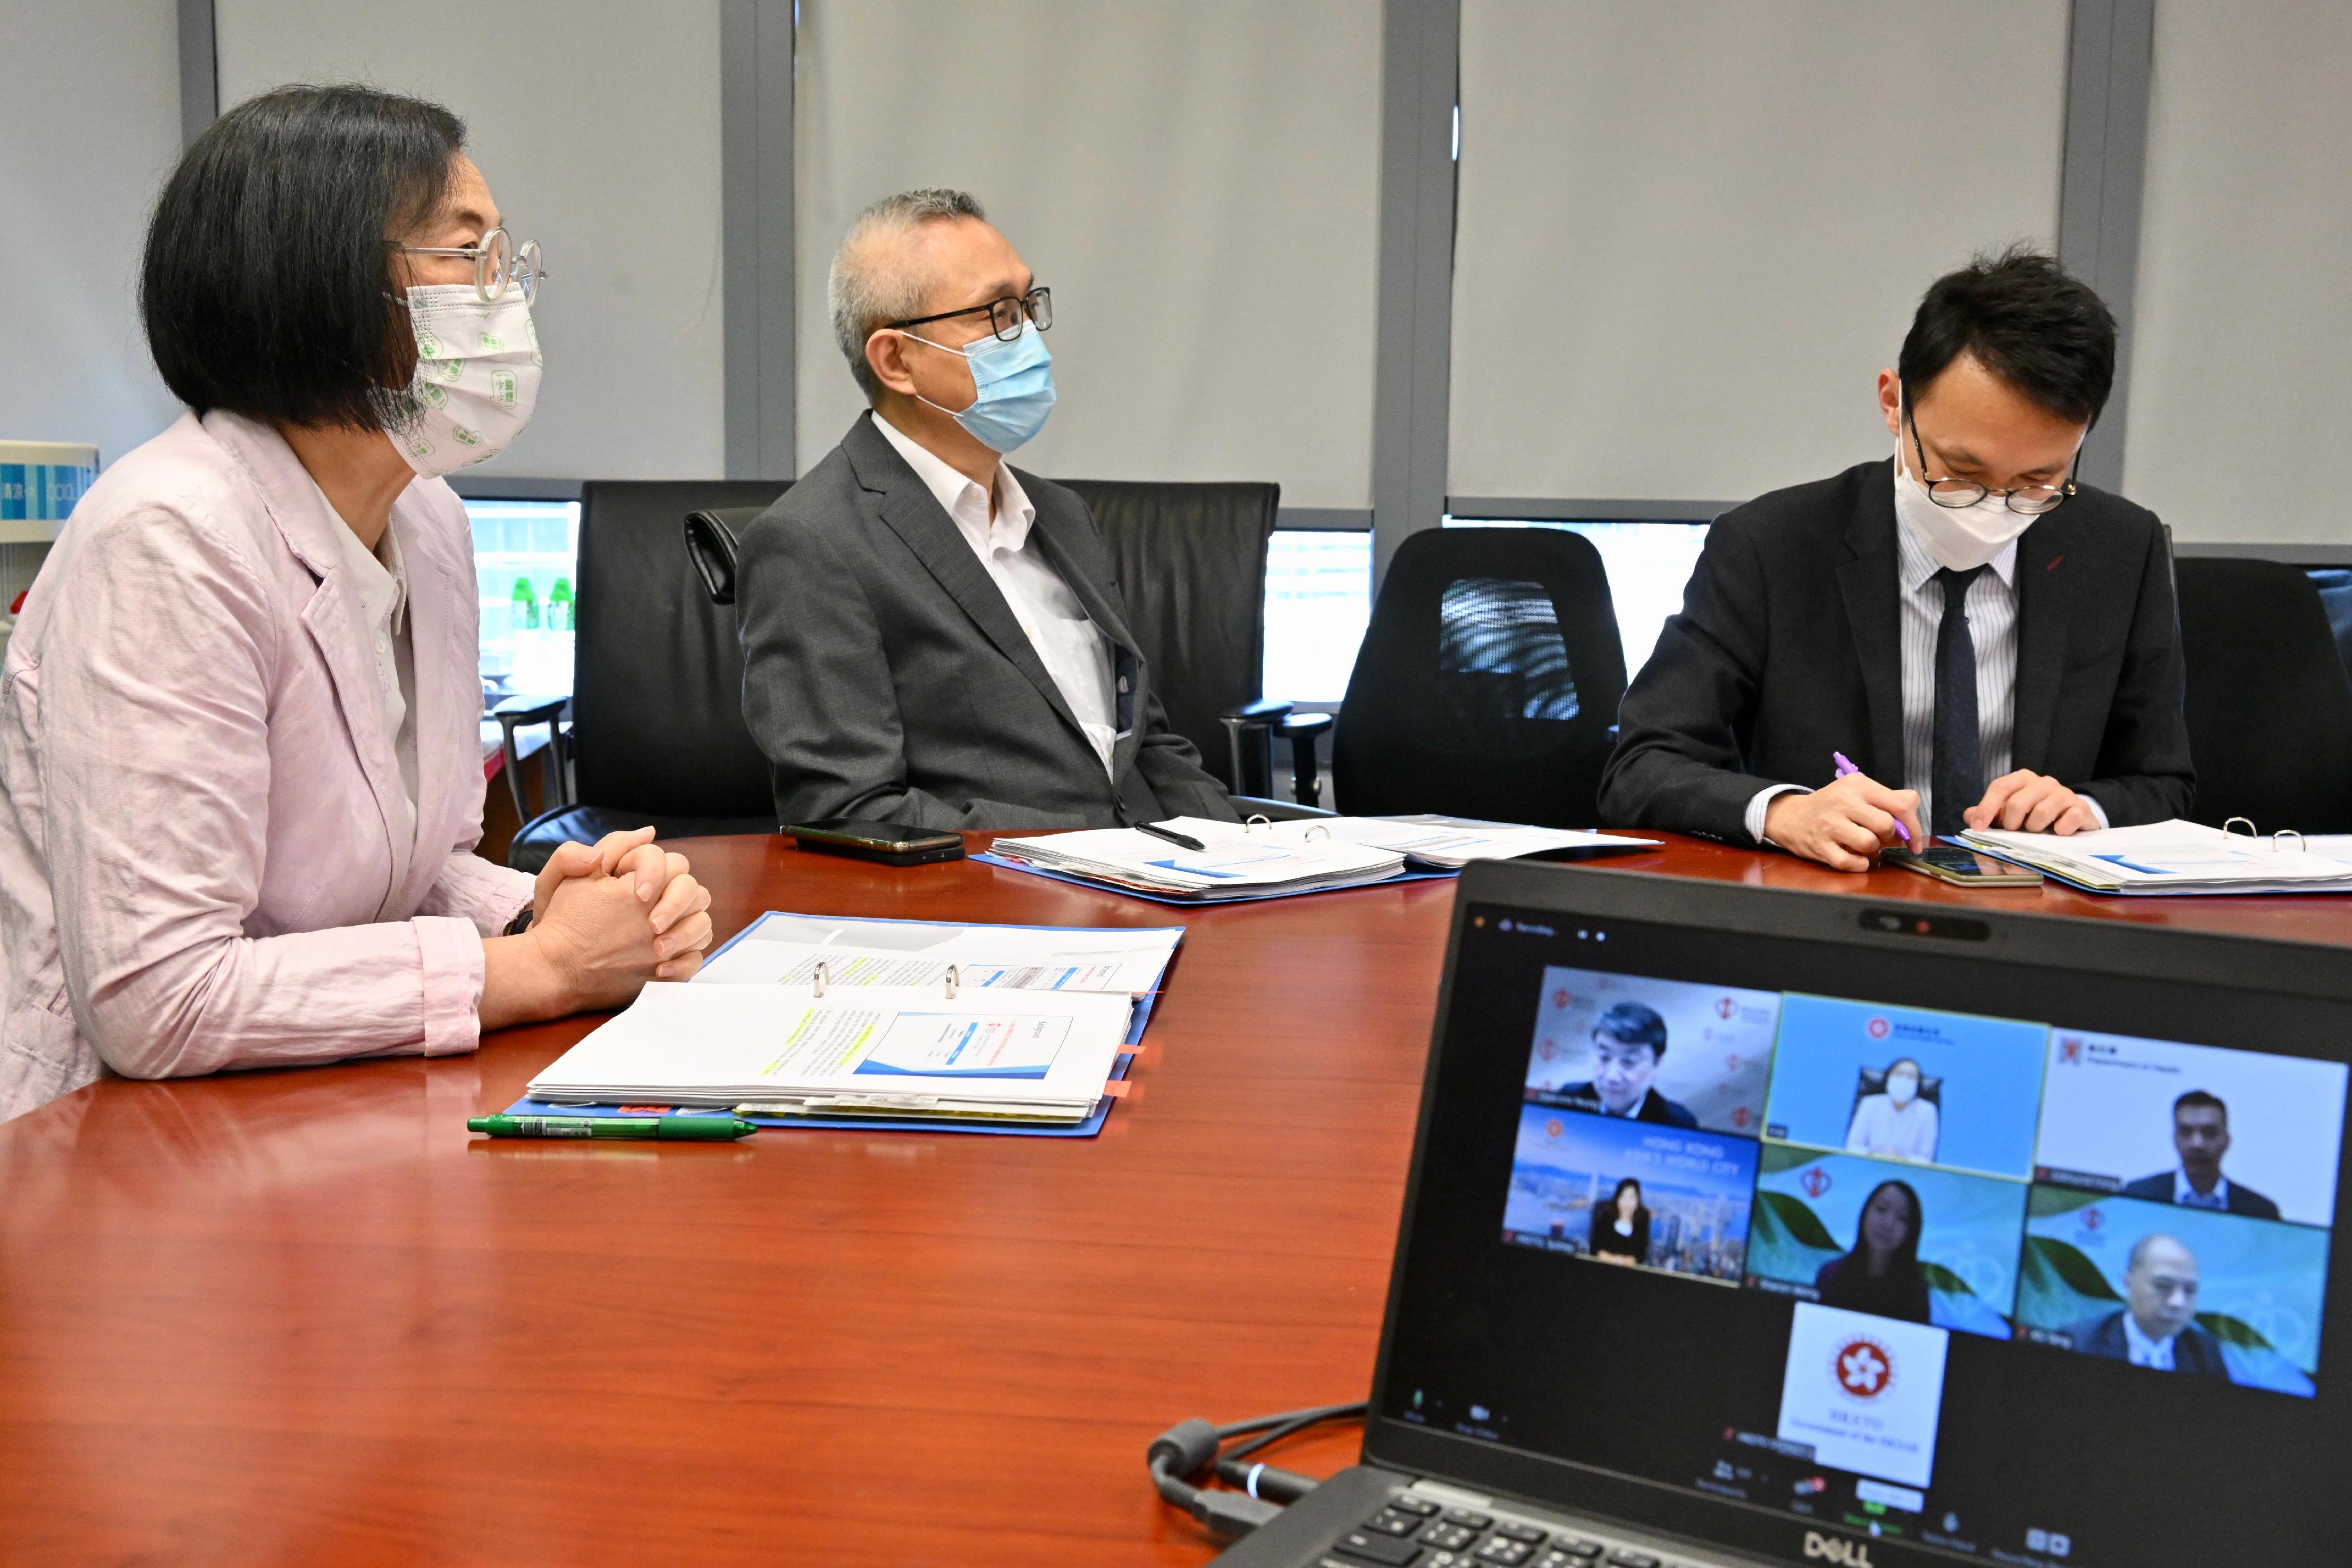 The Secretary for Food and Health, Professor Sophia Chan (left), and the Under Secretary for Food and Health, Dr Chui Tak-yi (centre), promote the new pathway for qualified doctors trained outside Hong Kong to obtain full registration and practise in Hong Kong at a webinar jointly organised by the Hong Kong Economic and Trade Office, Sydney and the Australasian Medical Services Coalition today (May 6).